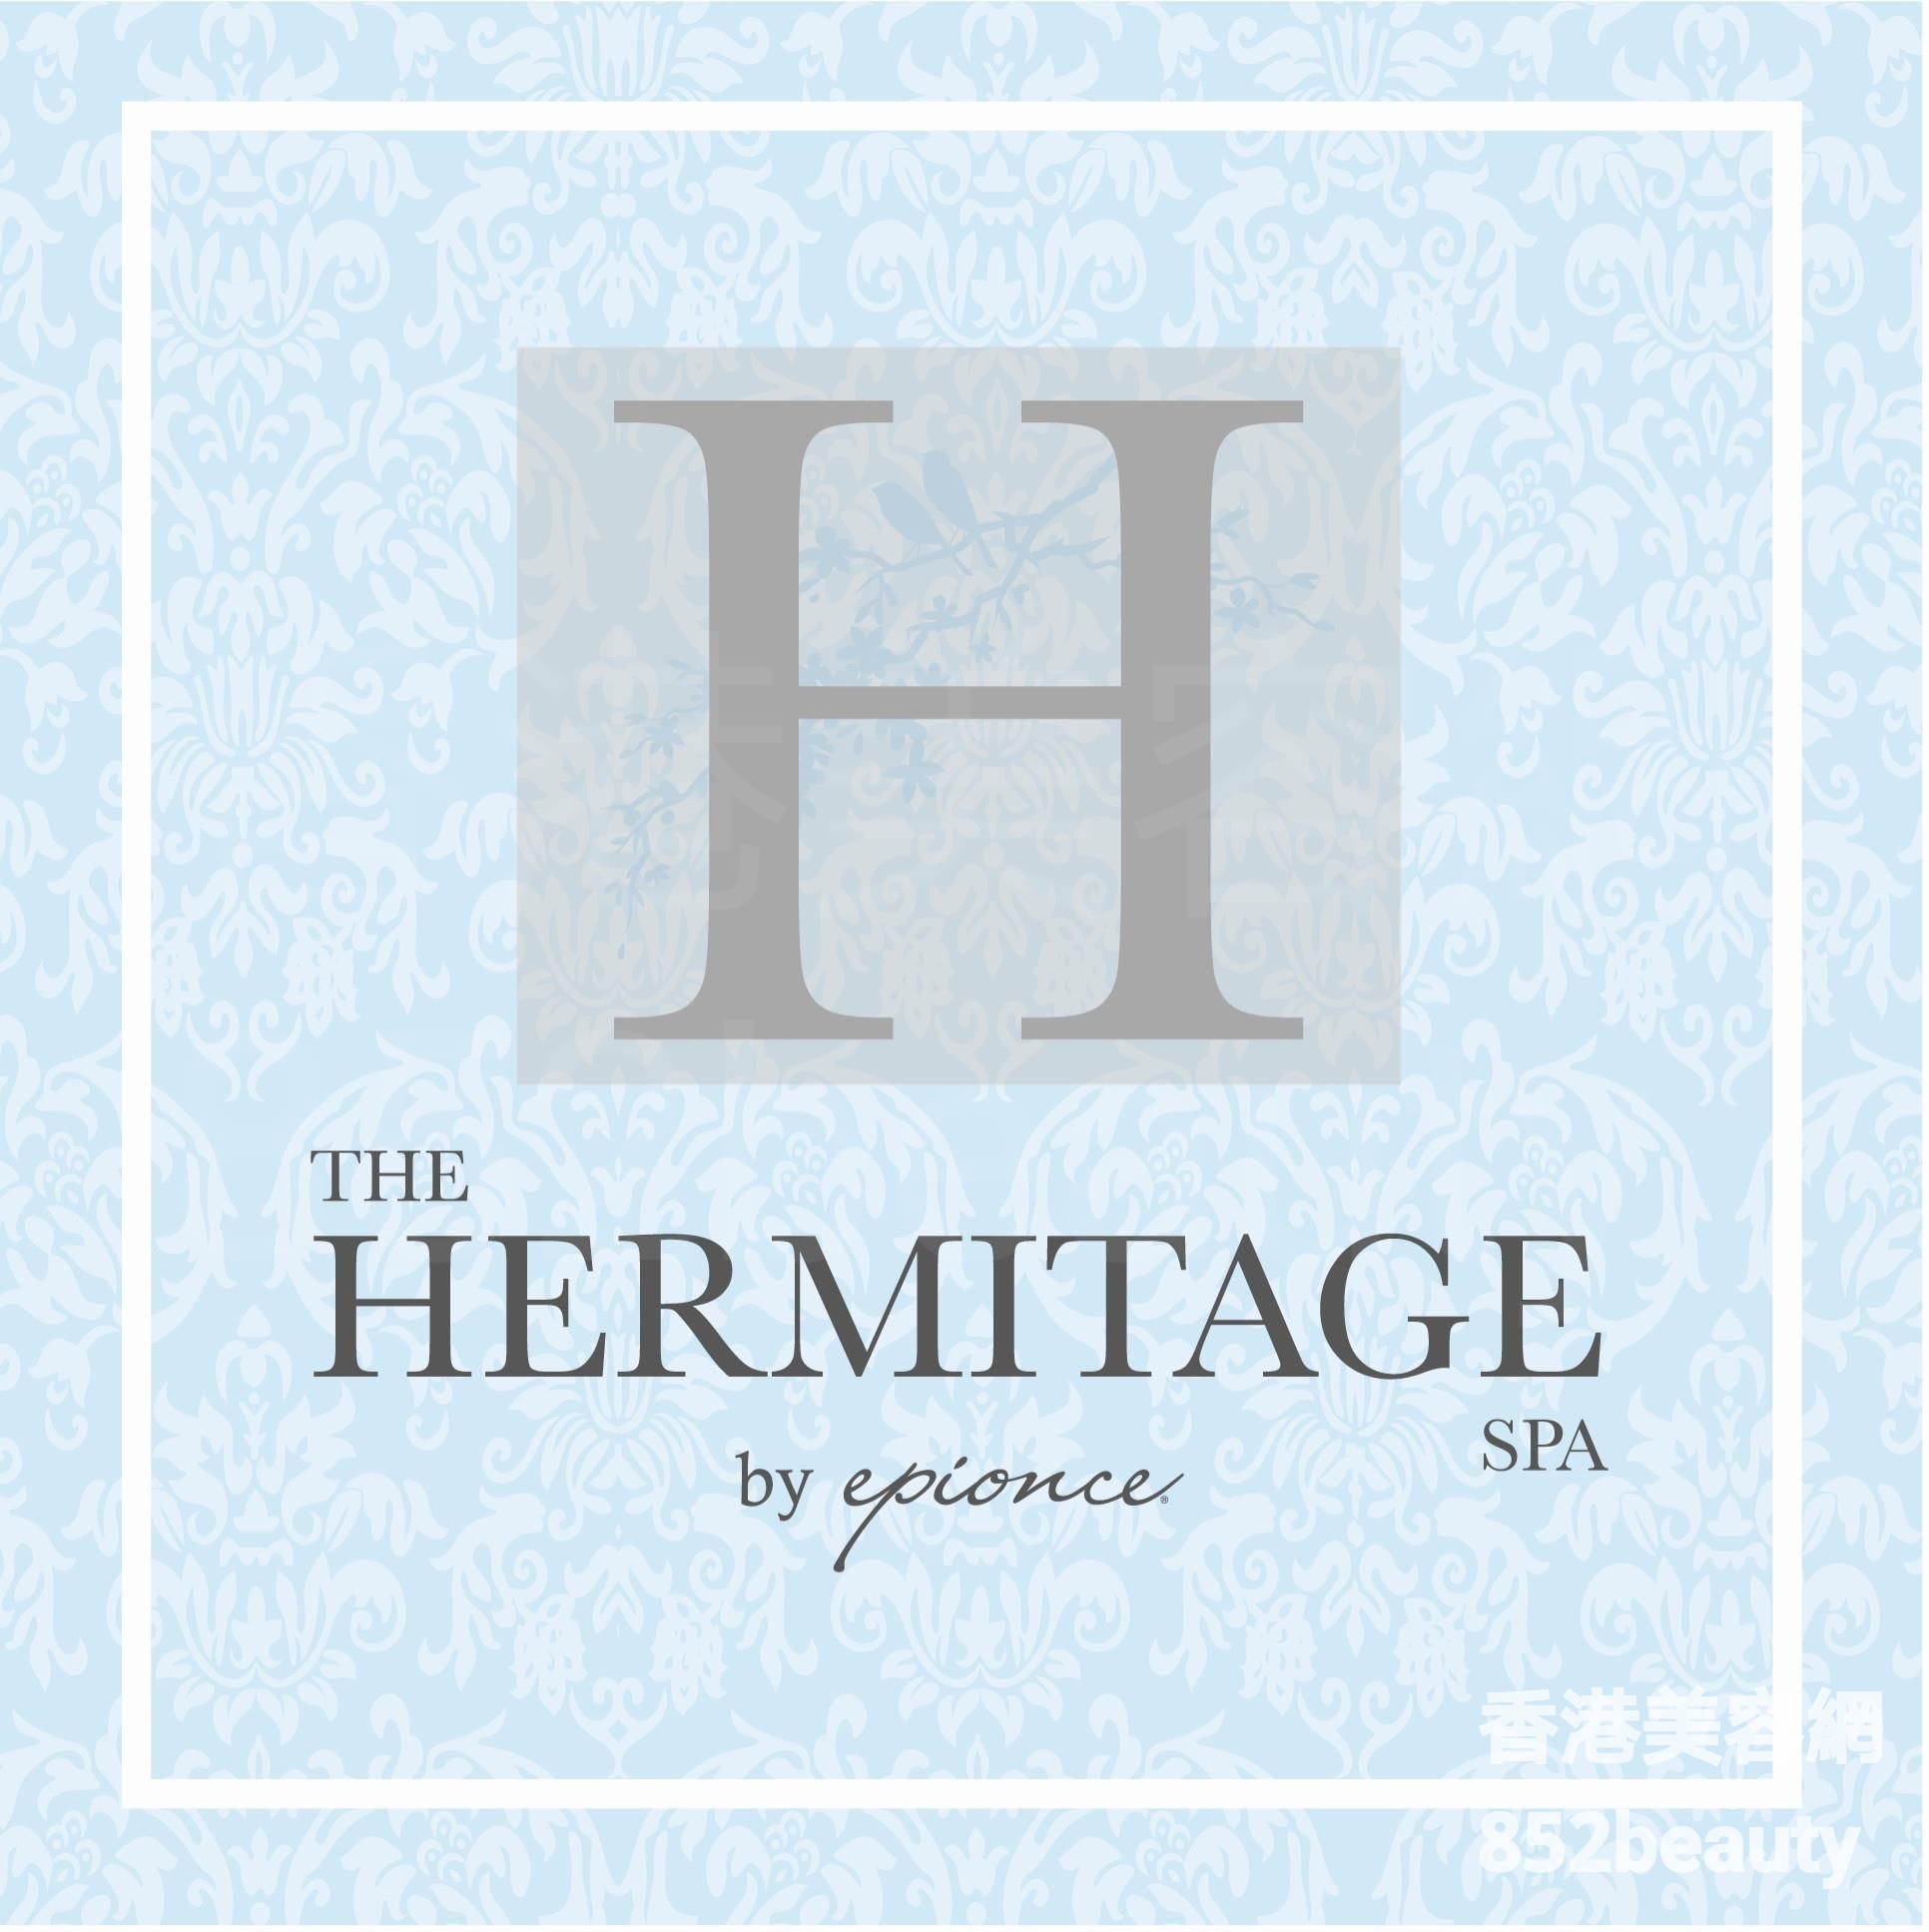 Slimming: The Hermitage Spa